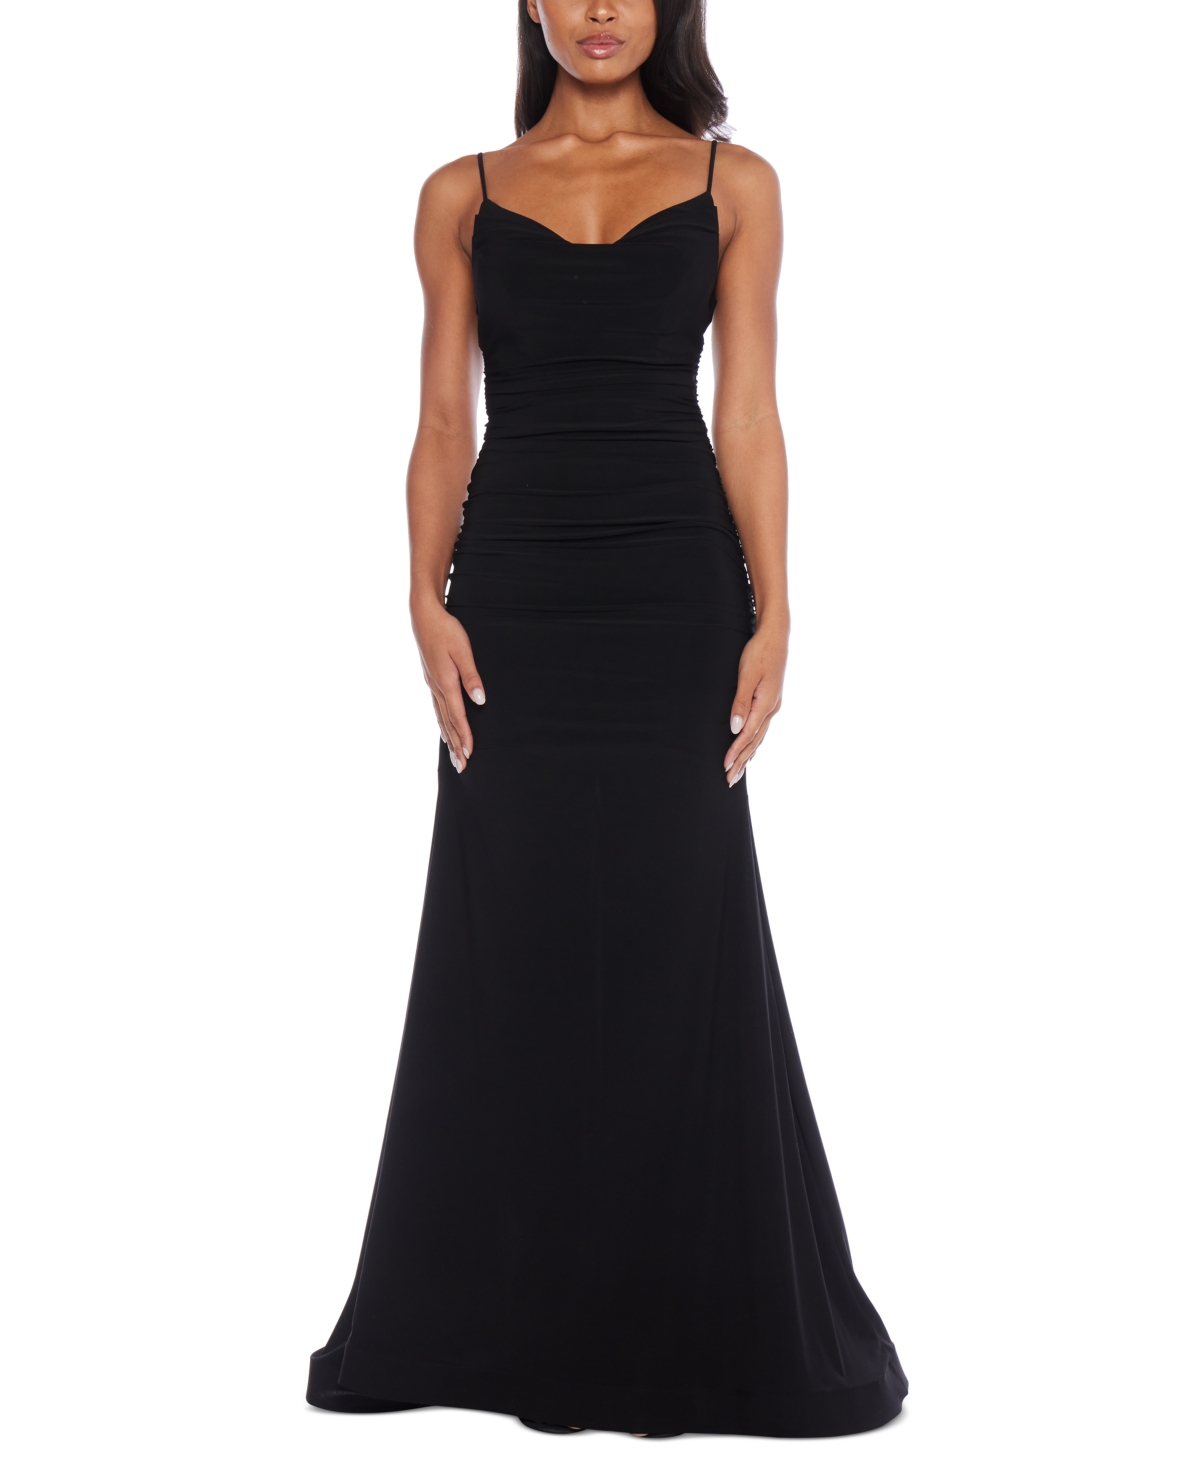 Juniors' Sweetheart-Neck Ruched Sleeveless Gown - Black